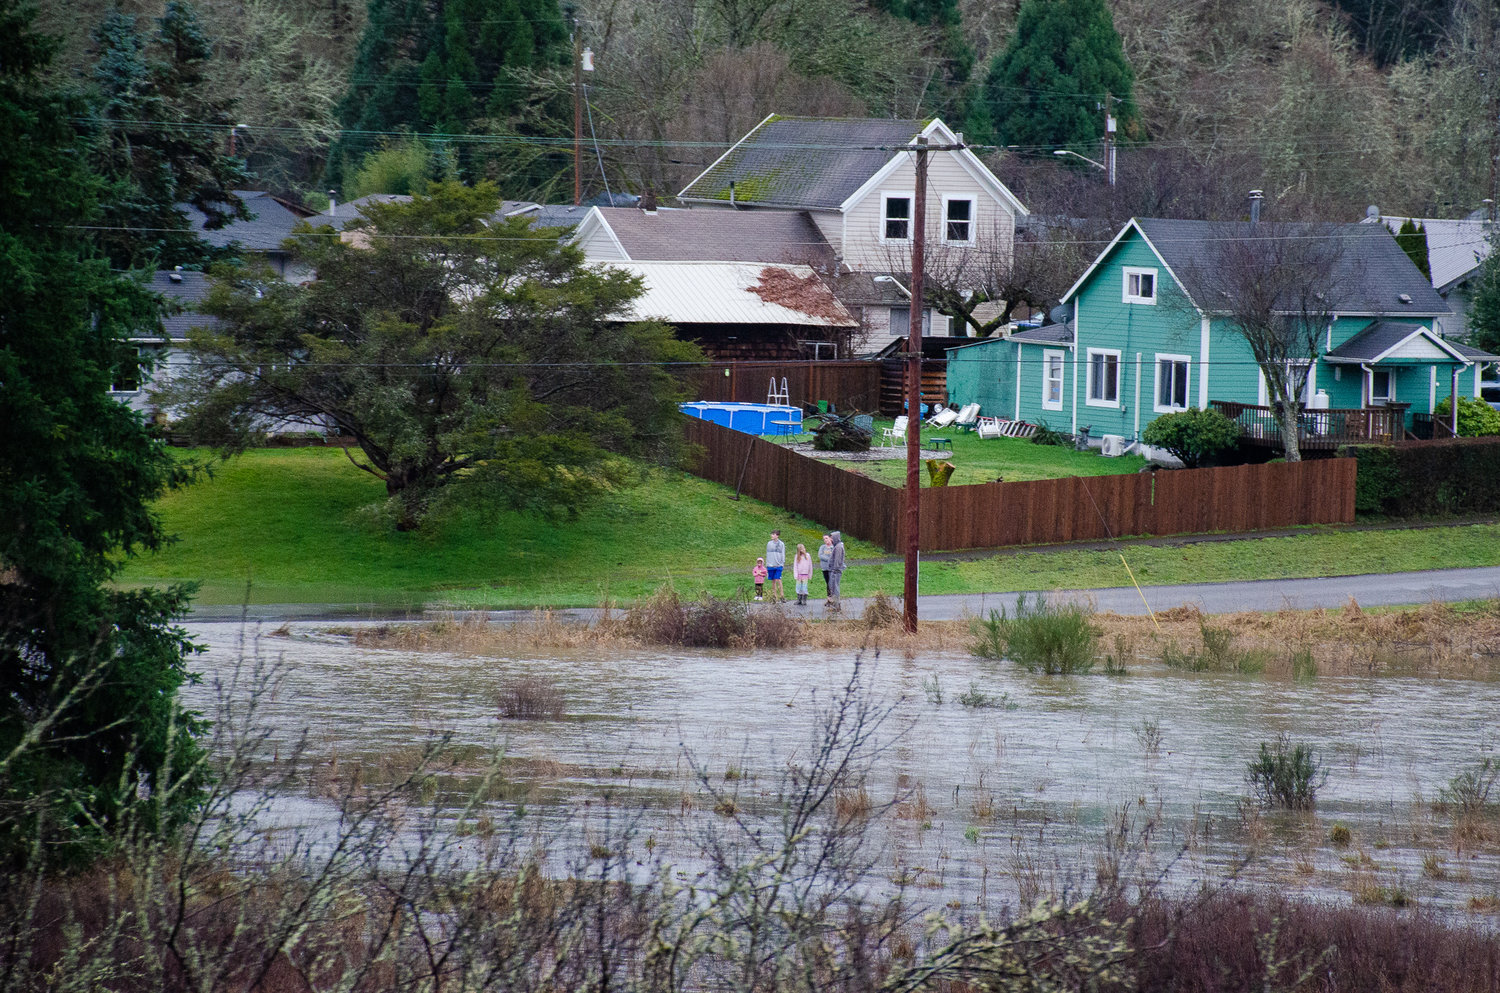 Bucoda residents awoke Friday morning to Skookumchuck River floodwaters inundating their roadways, though emergency operation center operators, fire staff and volunteers were waiting for sunlight to assess the damage.